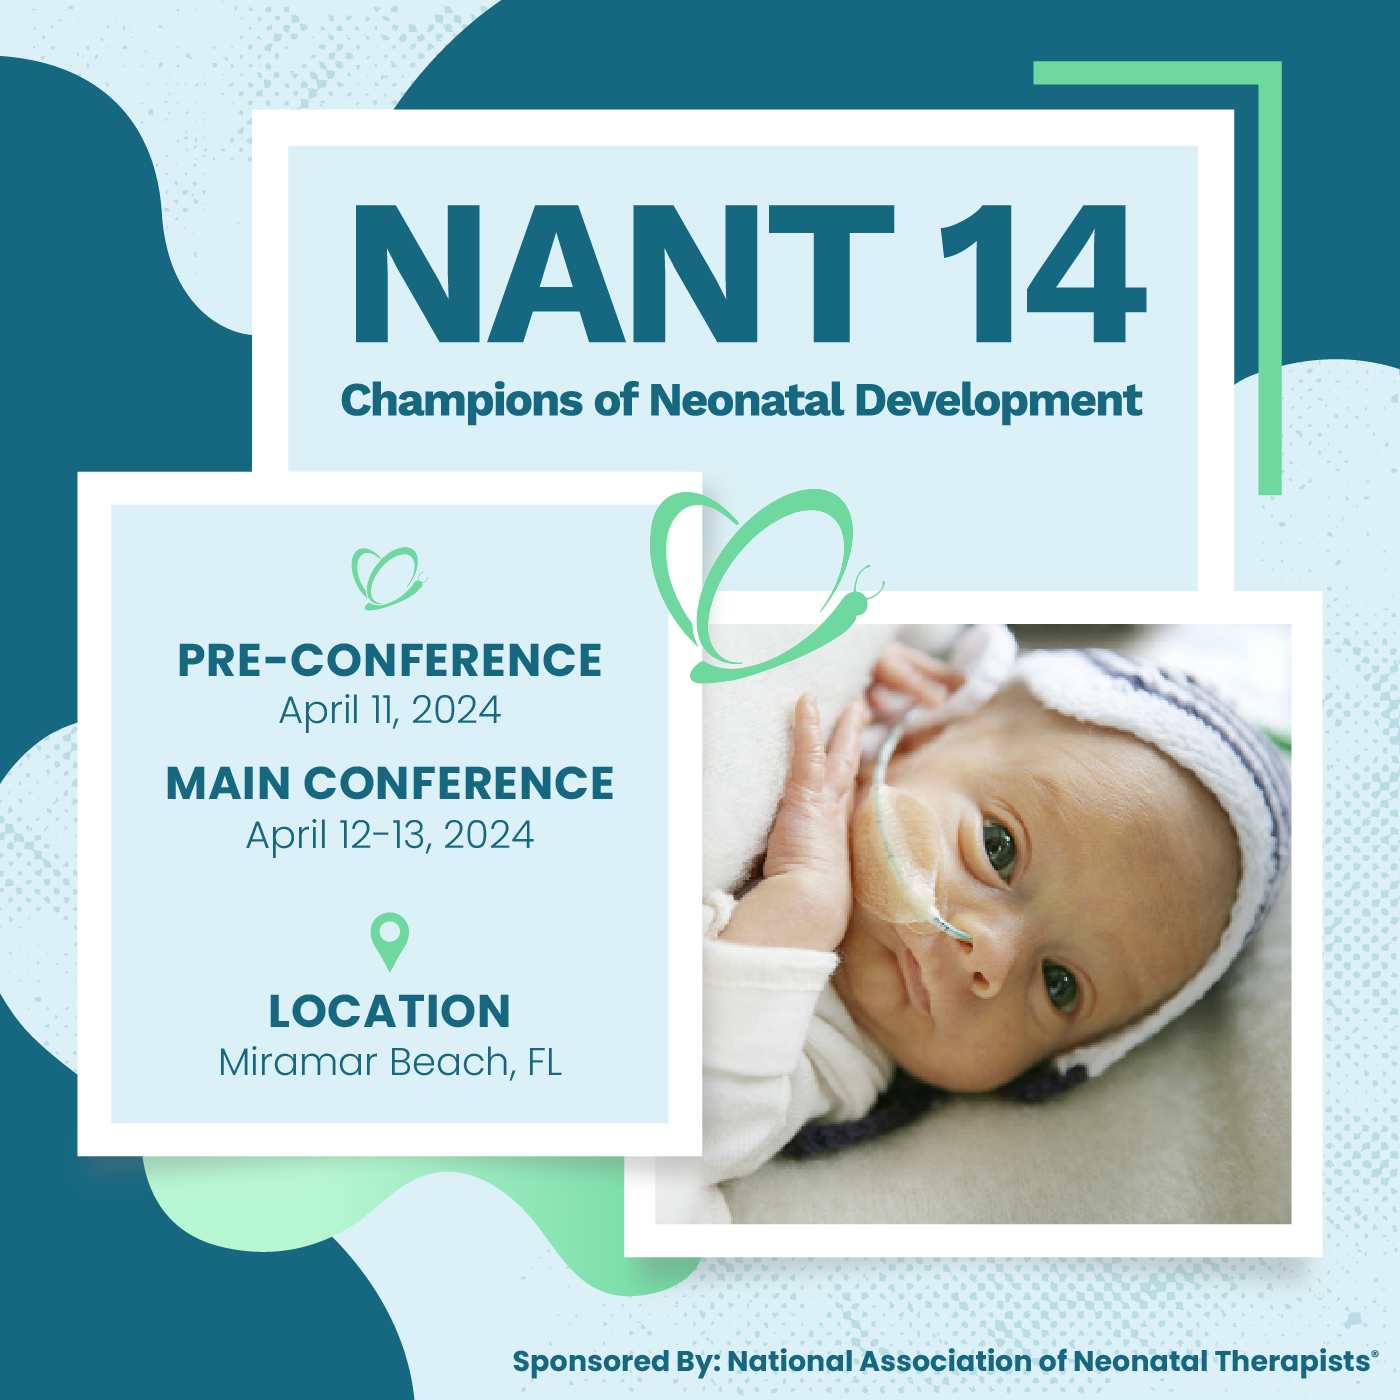 Annual Conference National Association of Neonatal Therapists